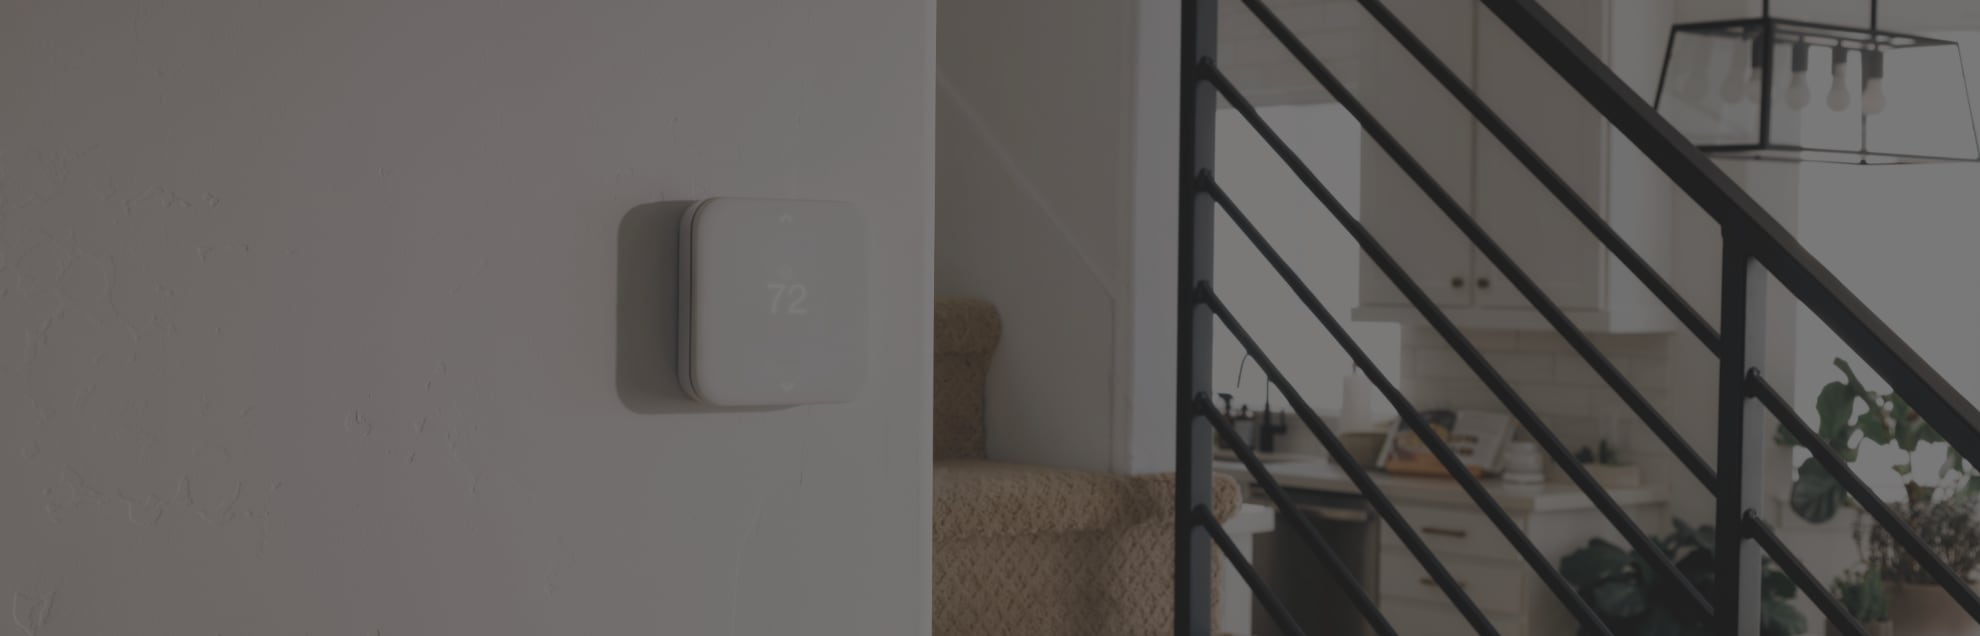 Athens Smart Thermostat